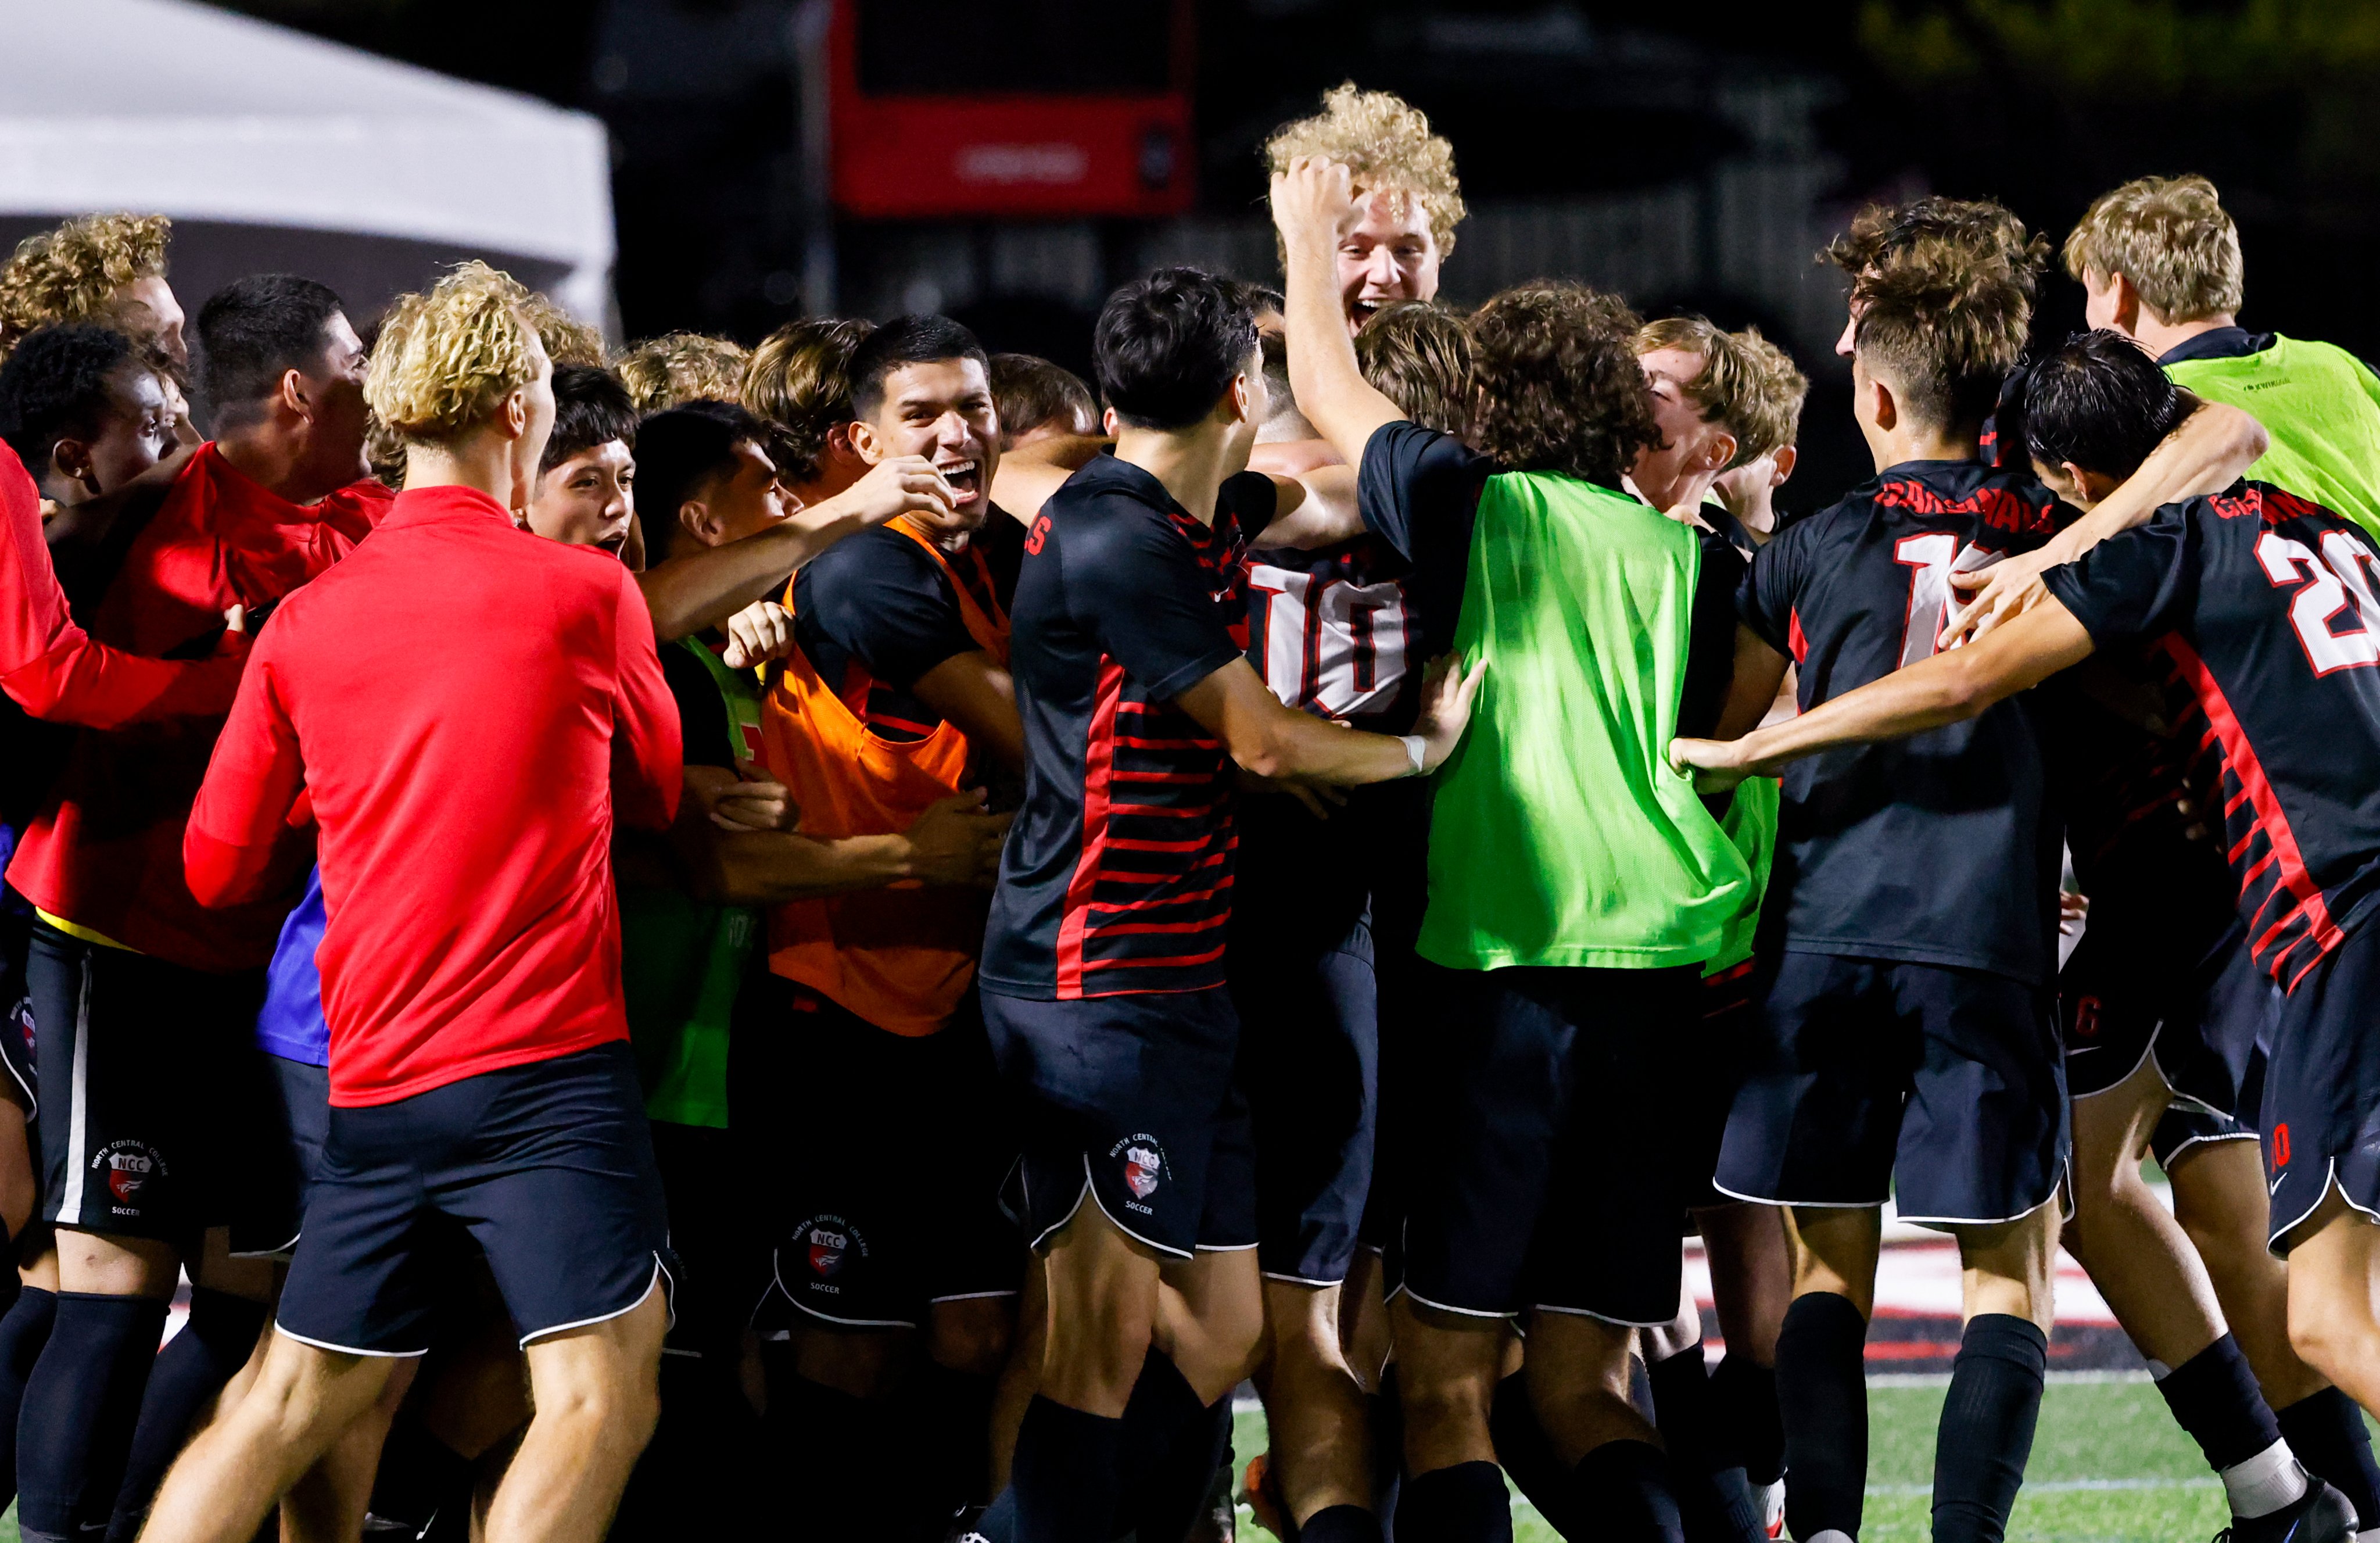 NCC Men's Soccer Team Heads to National Tournament